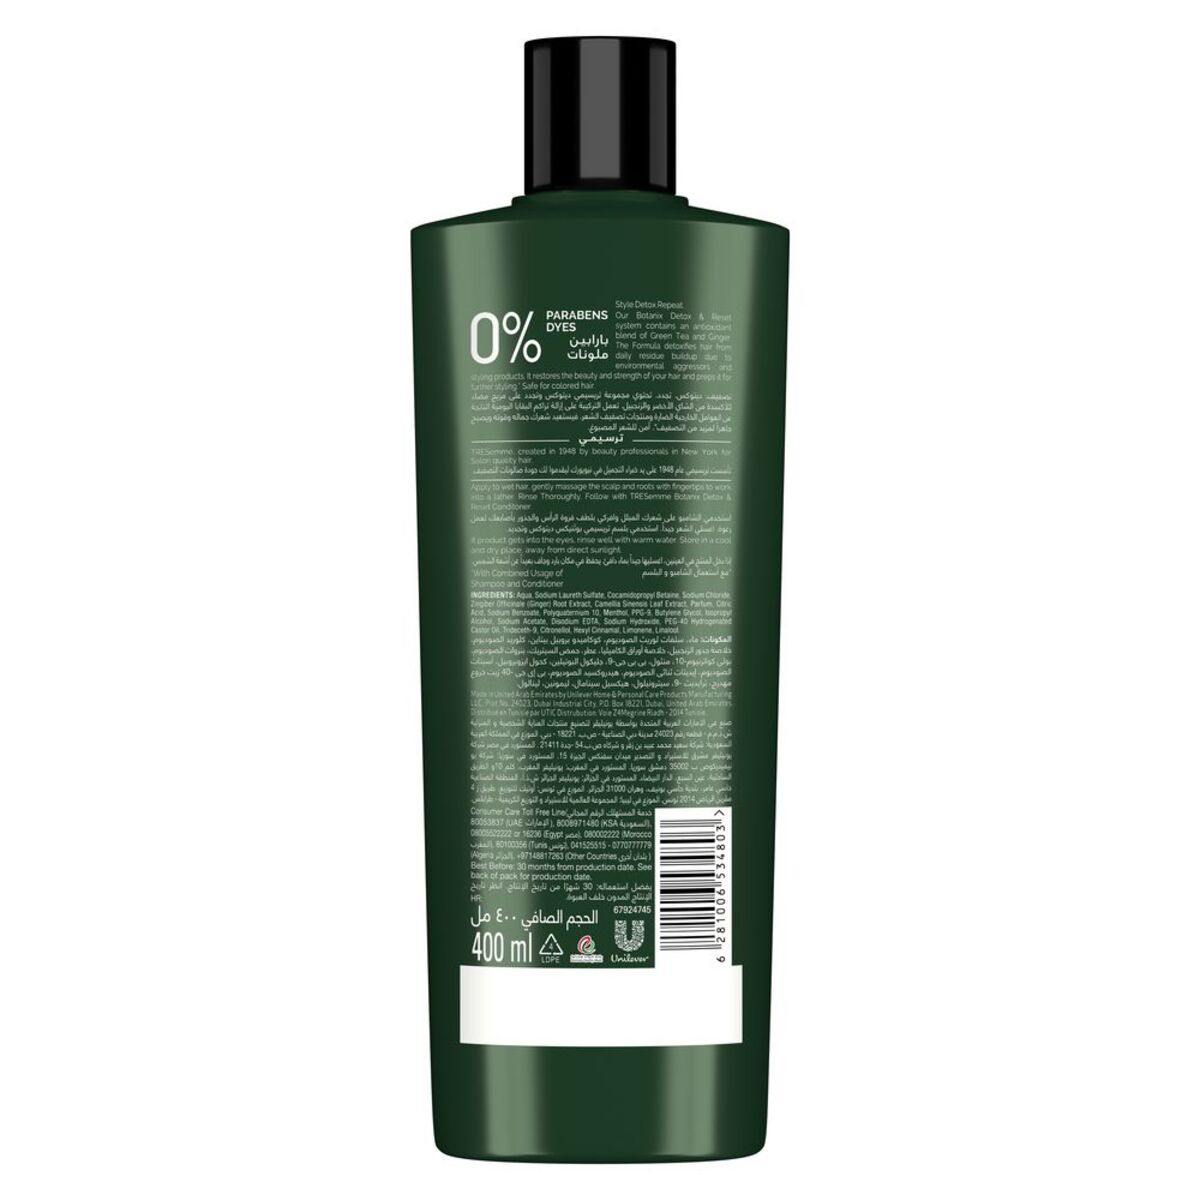 Tresemme Botanix Natural Detox And Reset Shampoo With Green Tea And Ginger